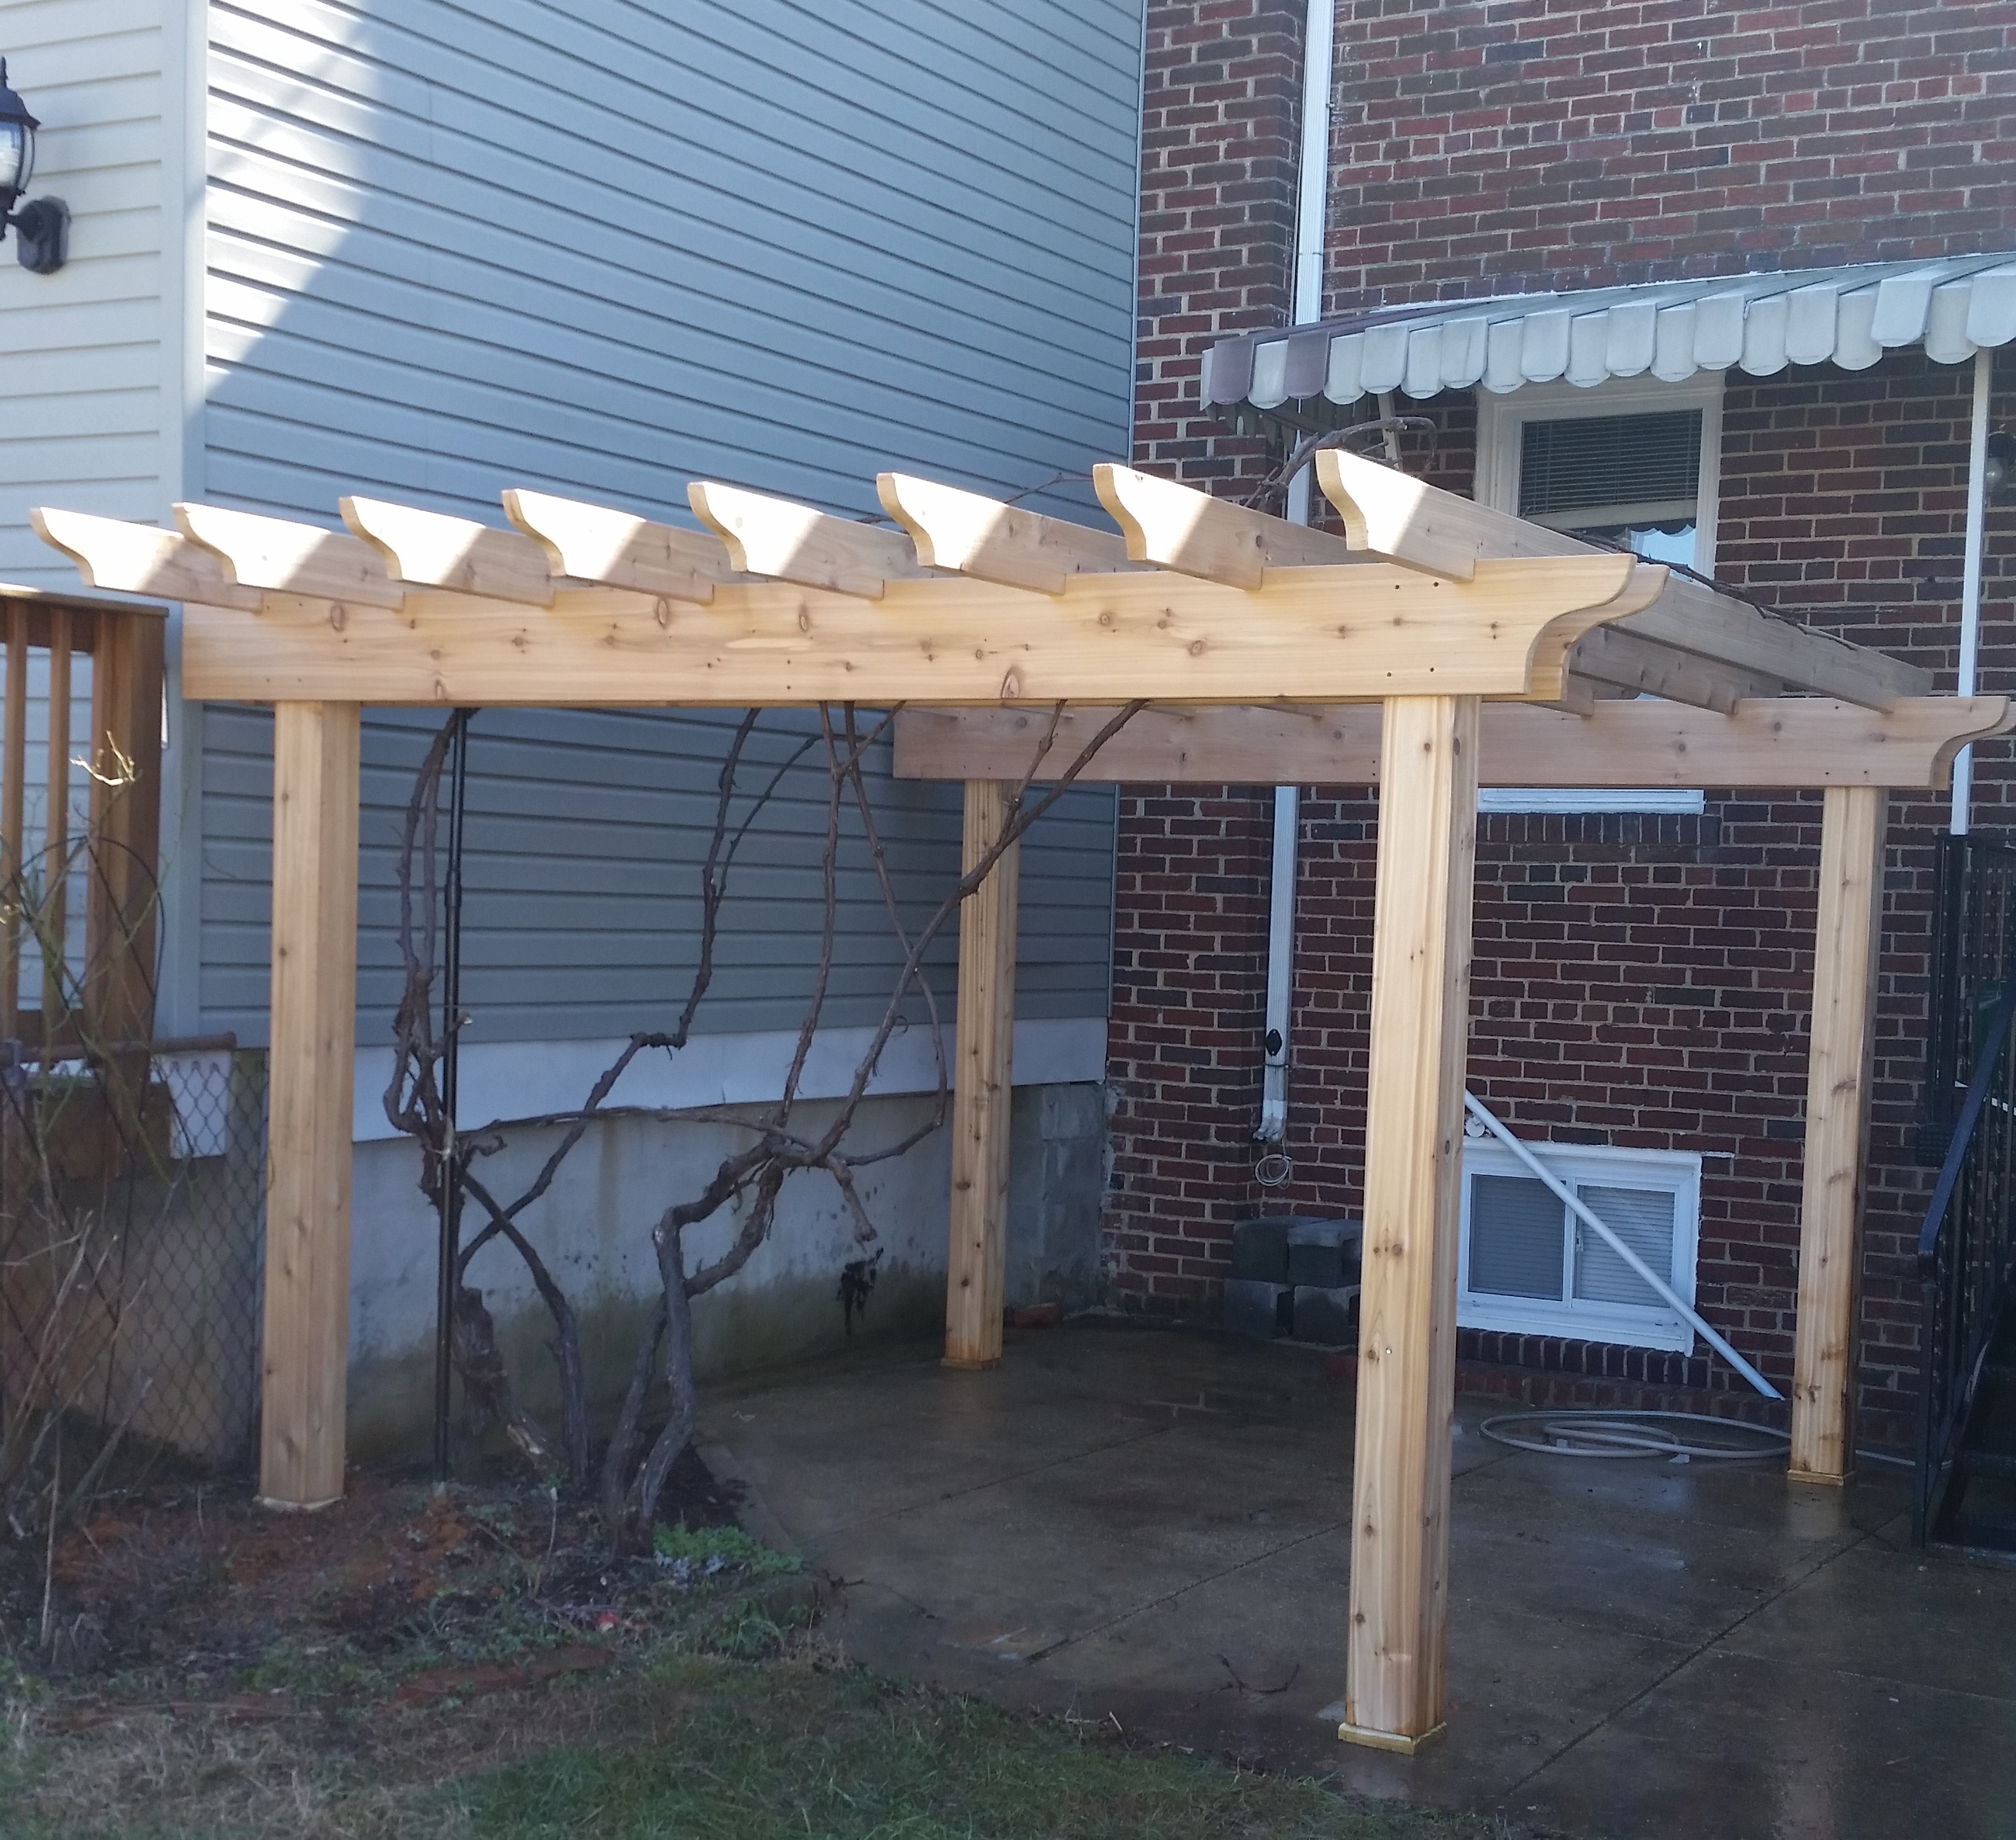 A Pergola over a Patio made with Pressure Treated Pine